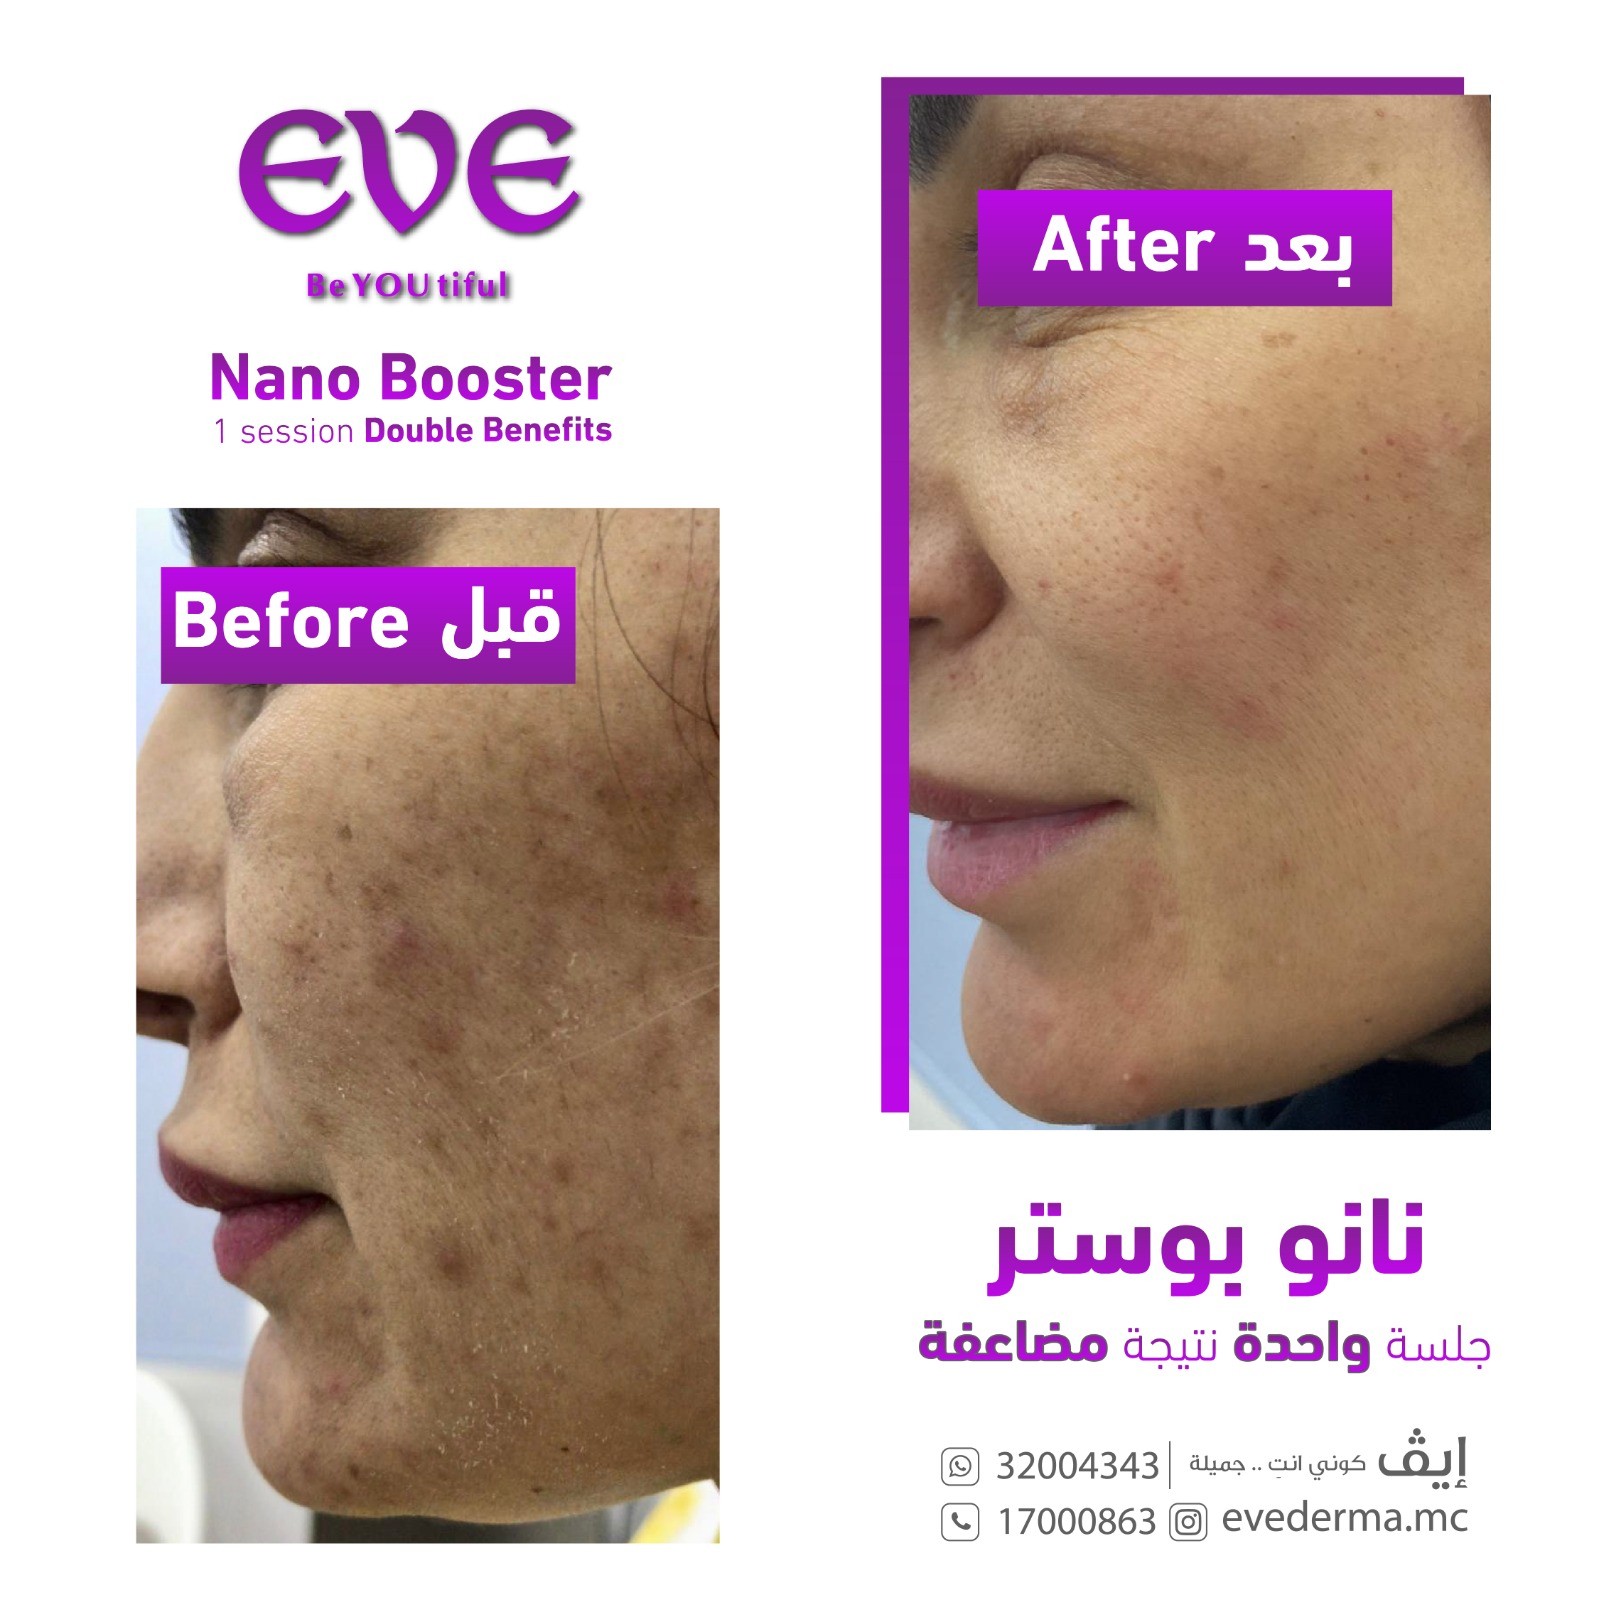 Exclusive in EVE - Nano Booster 1 session Double Benefits